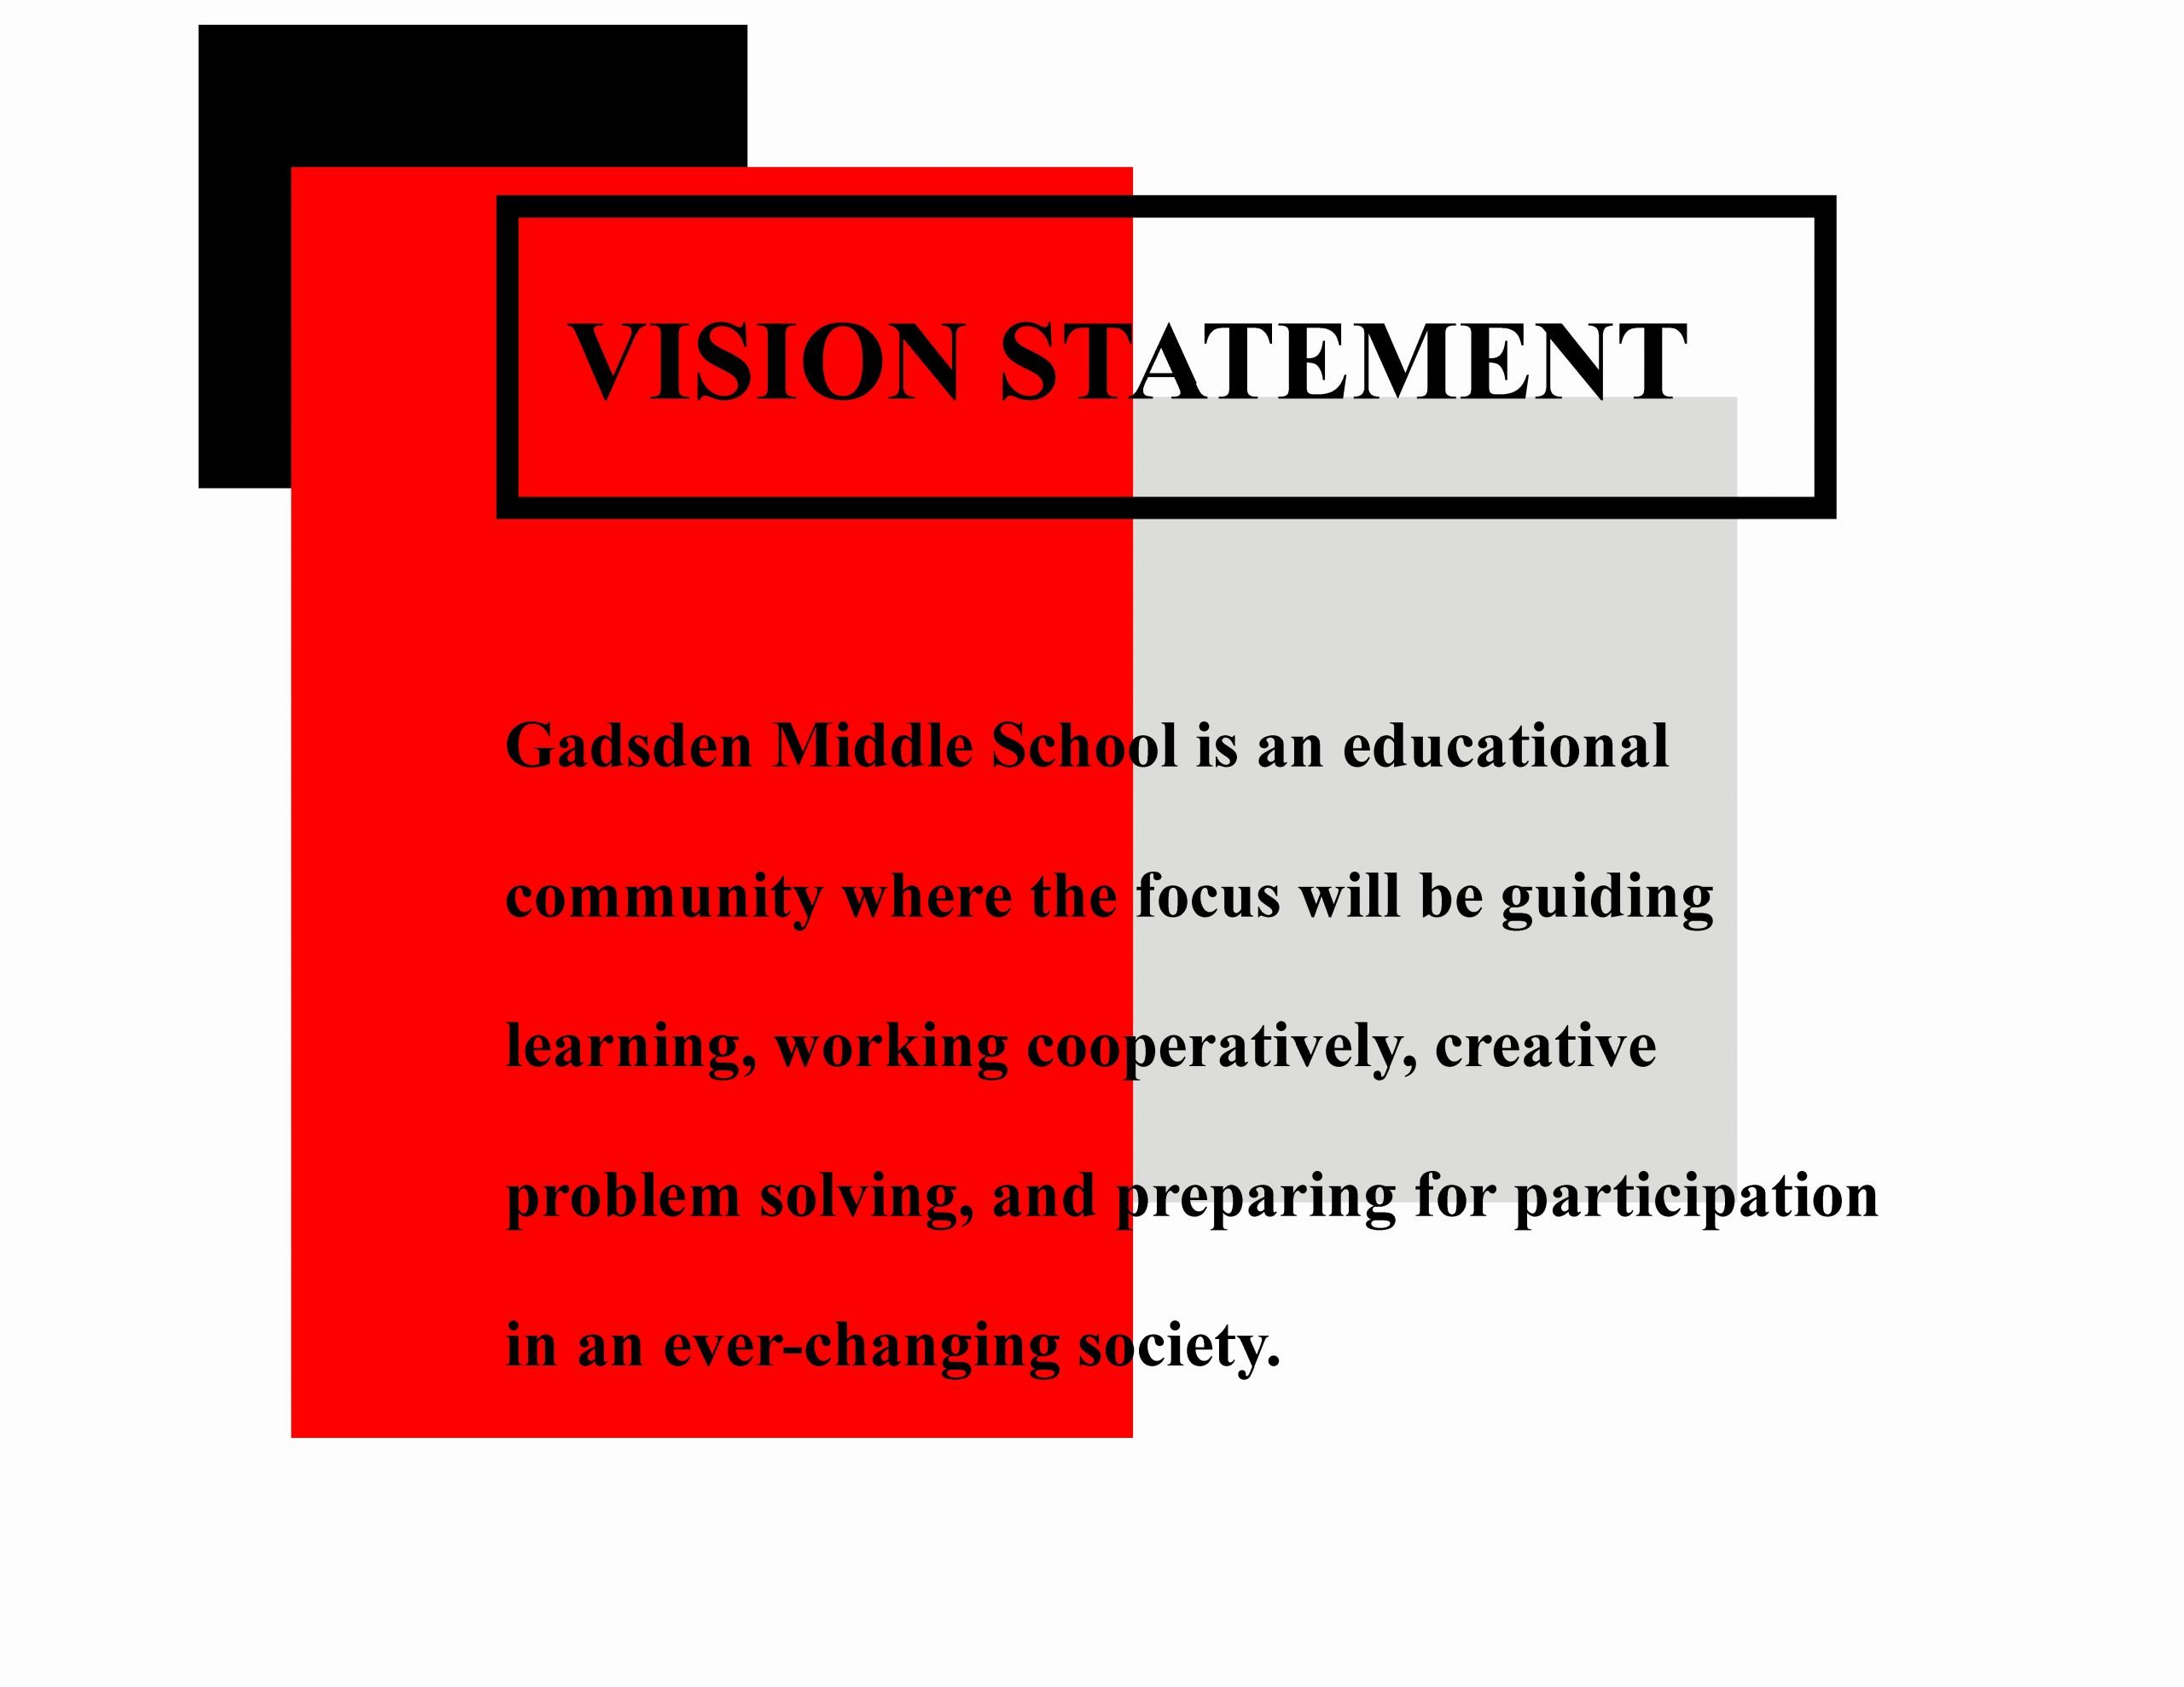 School Of Nursing Mission Statement Examples Beautiful Financial Advisor Vision Statement Examples